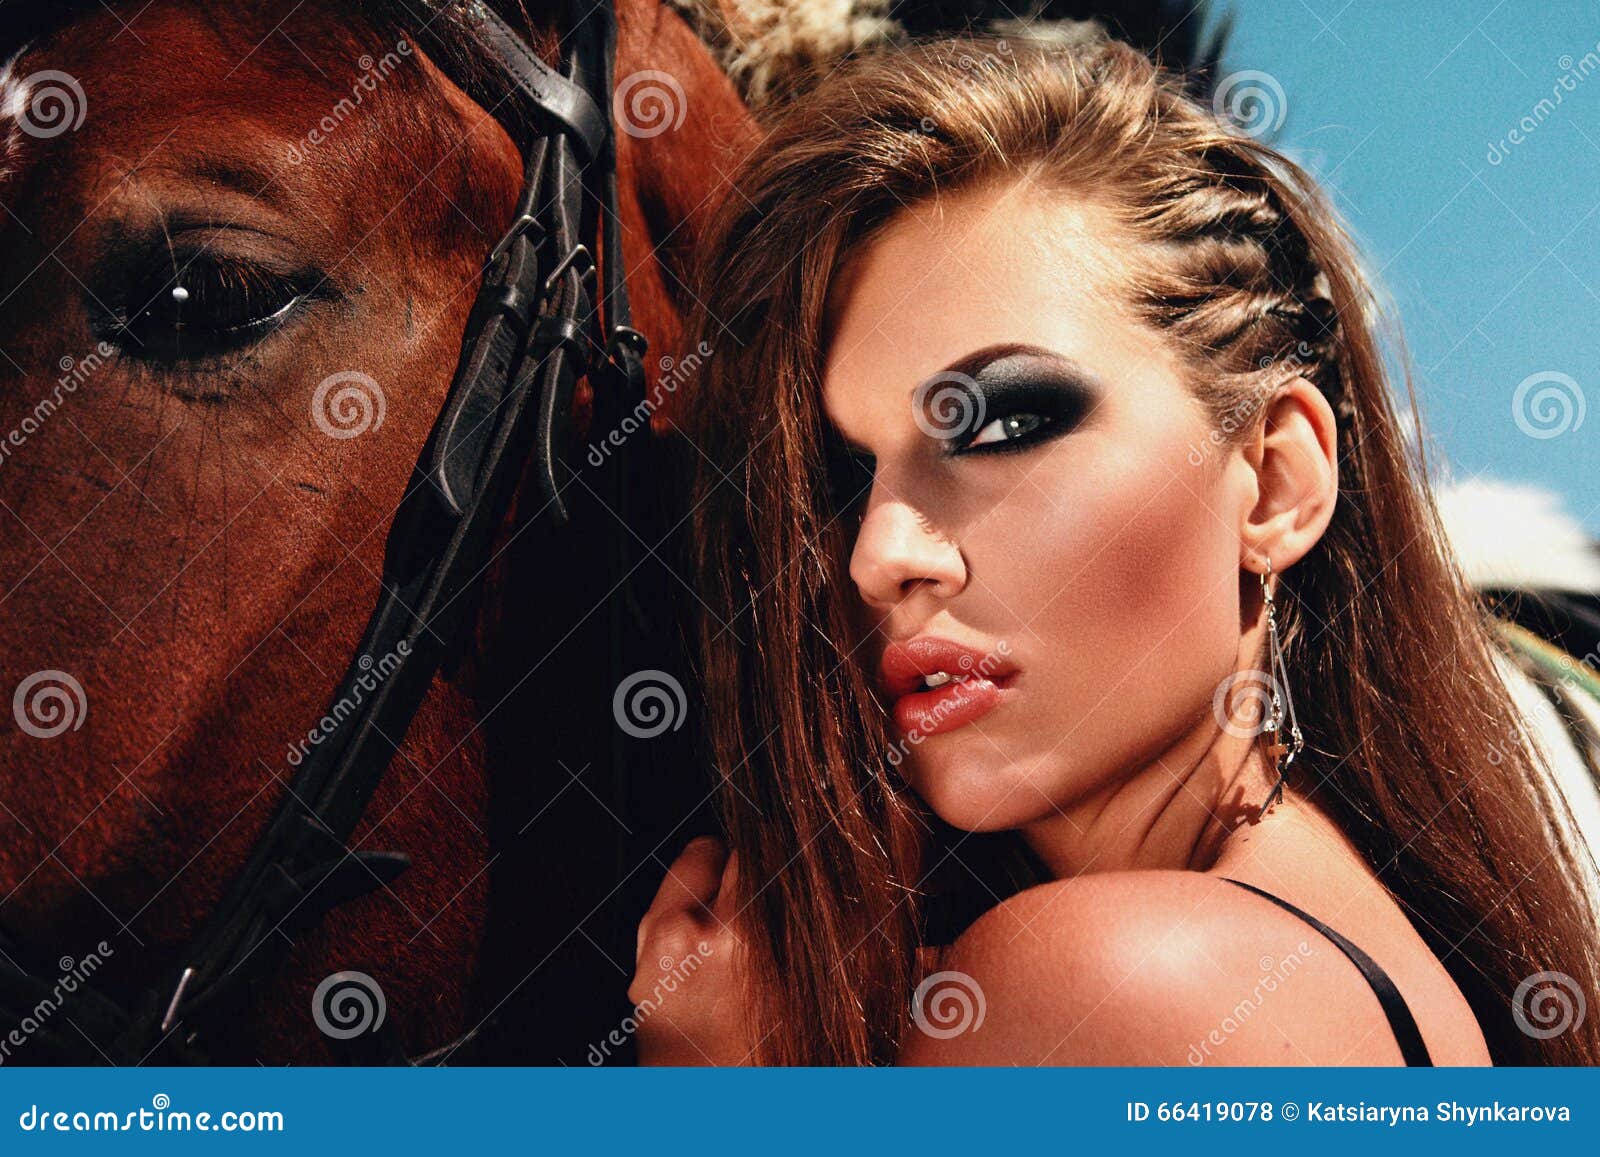 Girl and horse. stock photo. Image of trendy, makeup - 66419078